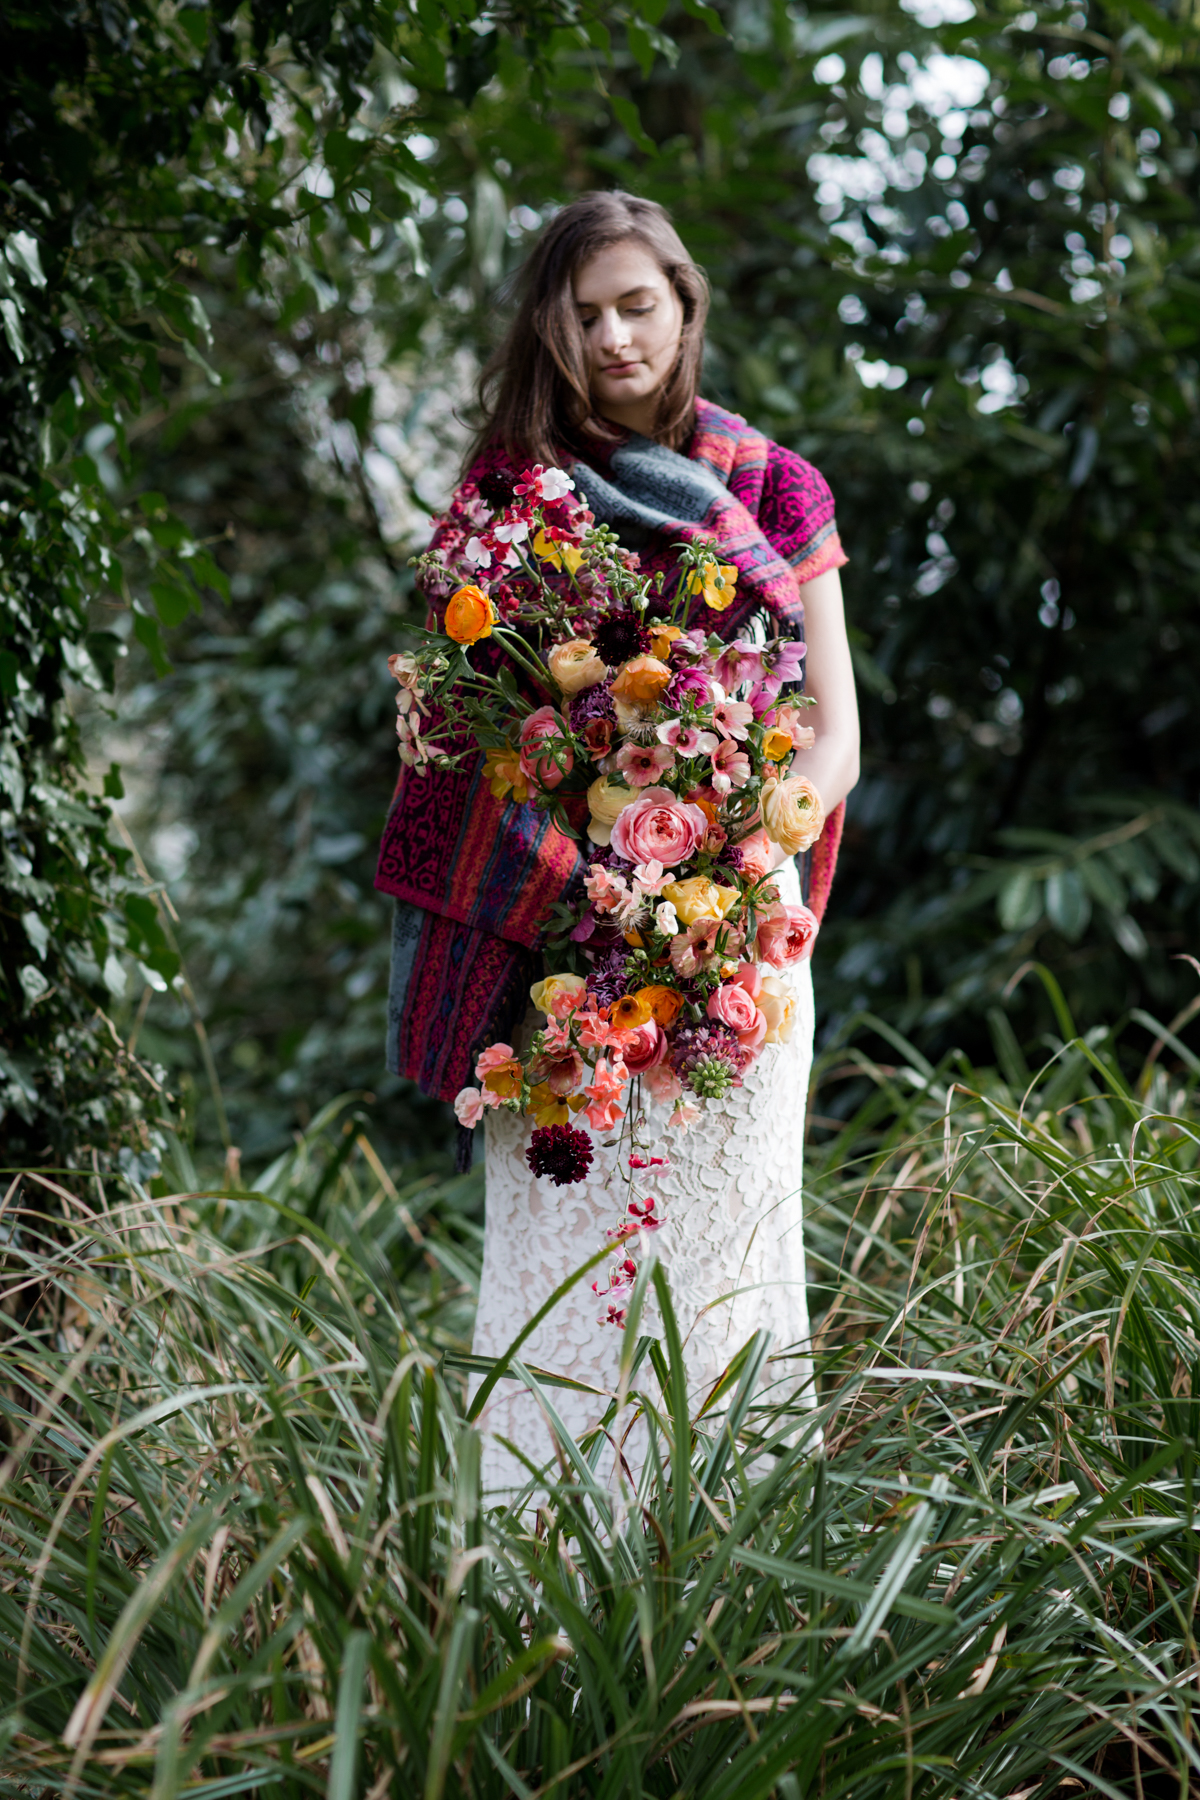 Styling by Jay Archer Floral Design. Photography by Rebecca Goddard.